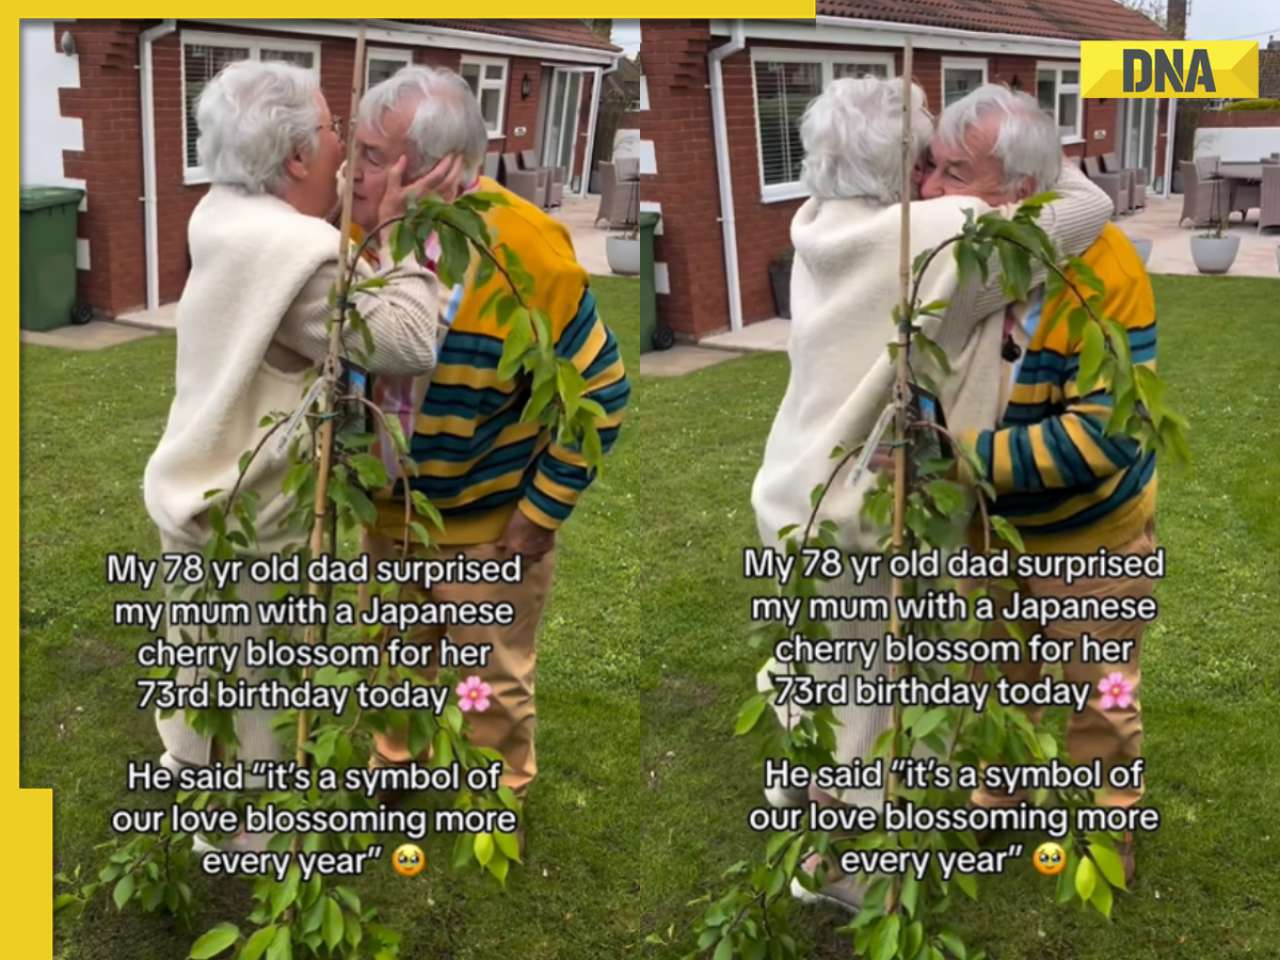 Viral video: 78-year-old man's heartwarming surprise for wife sparks tears of joy